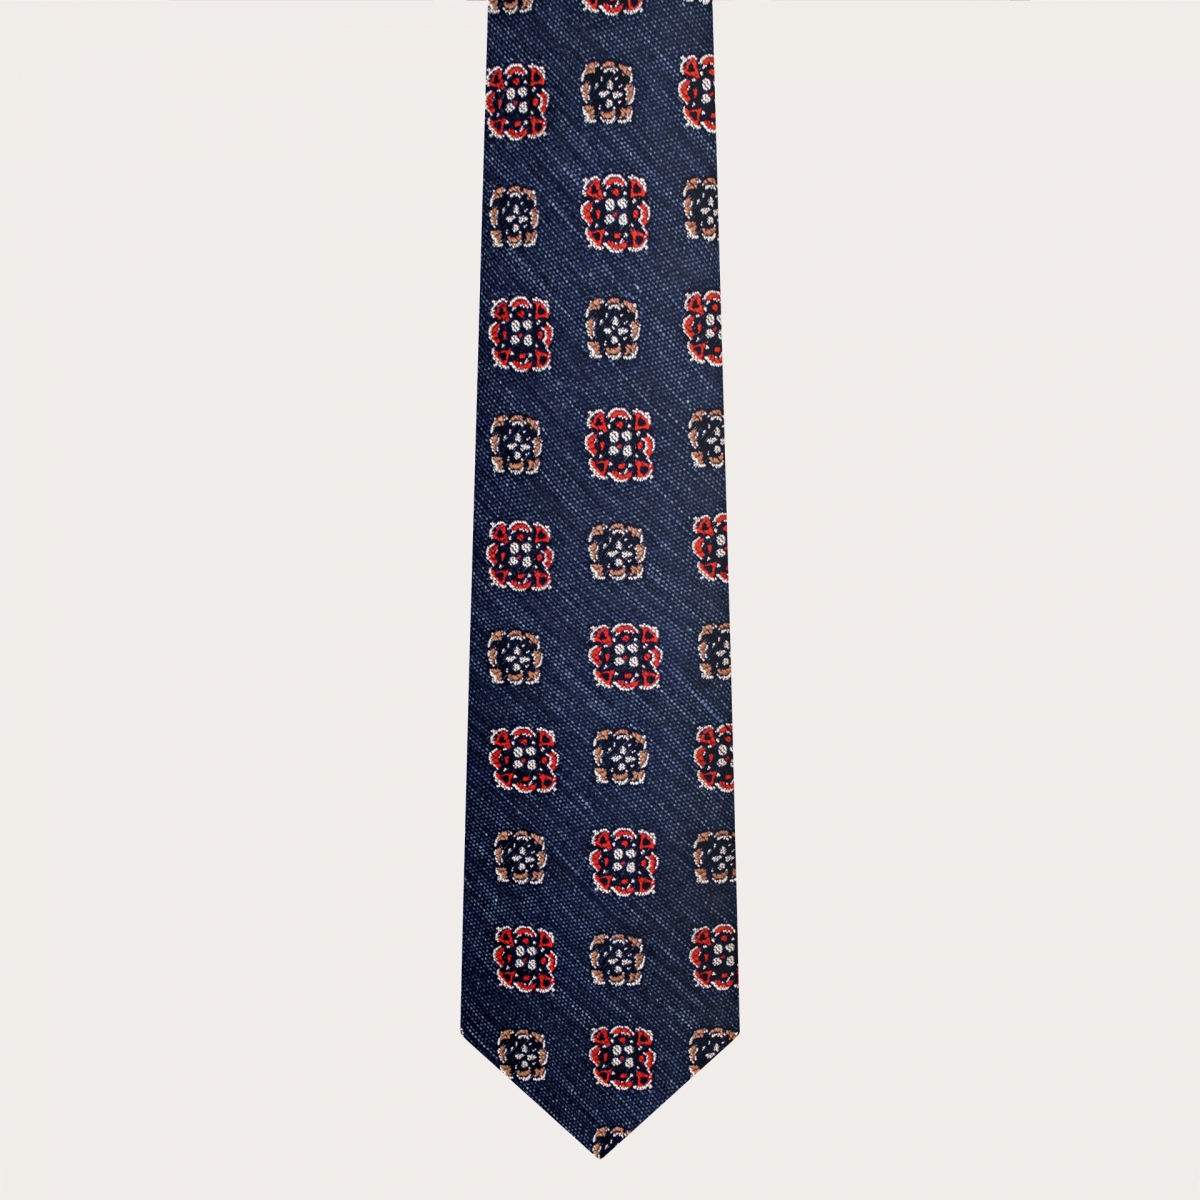 BRUCLE Silk and cotton necktie, denim pattern with geometric flowers